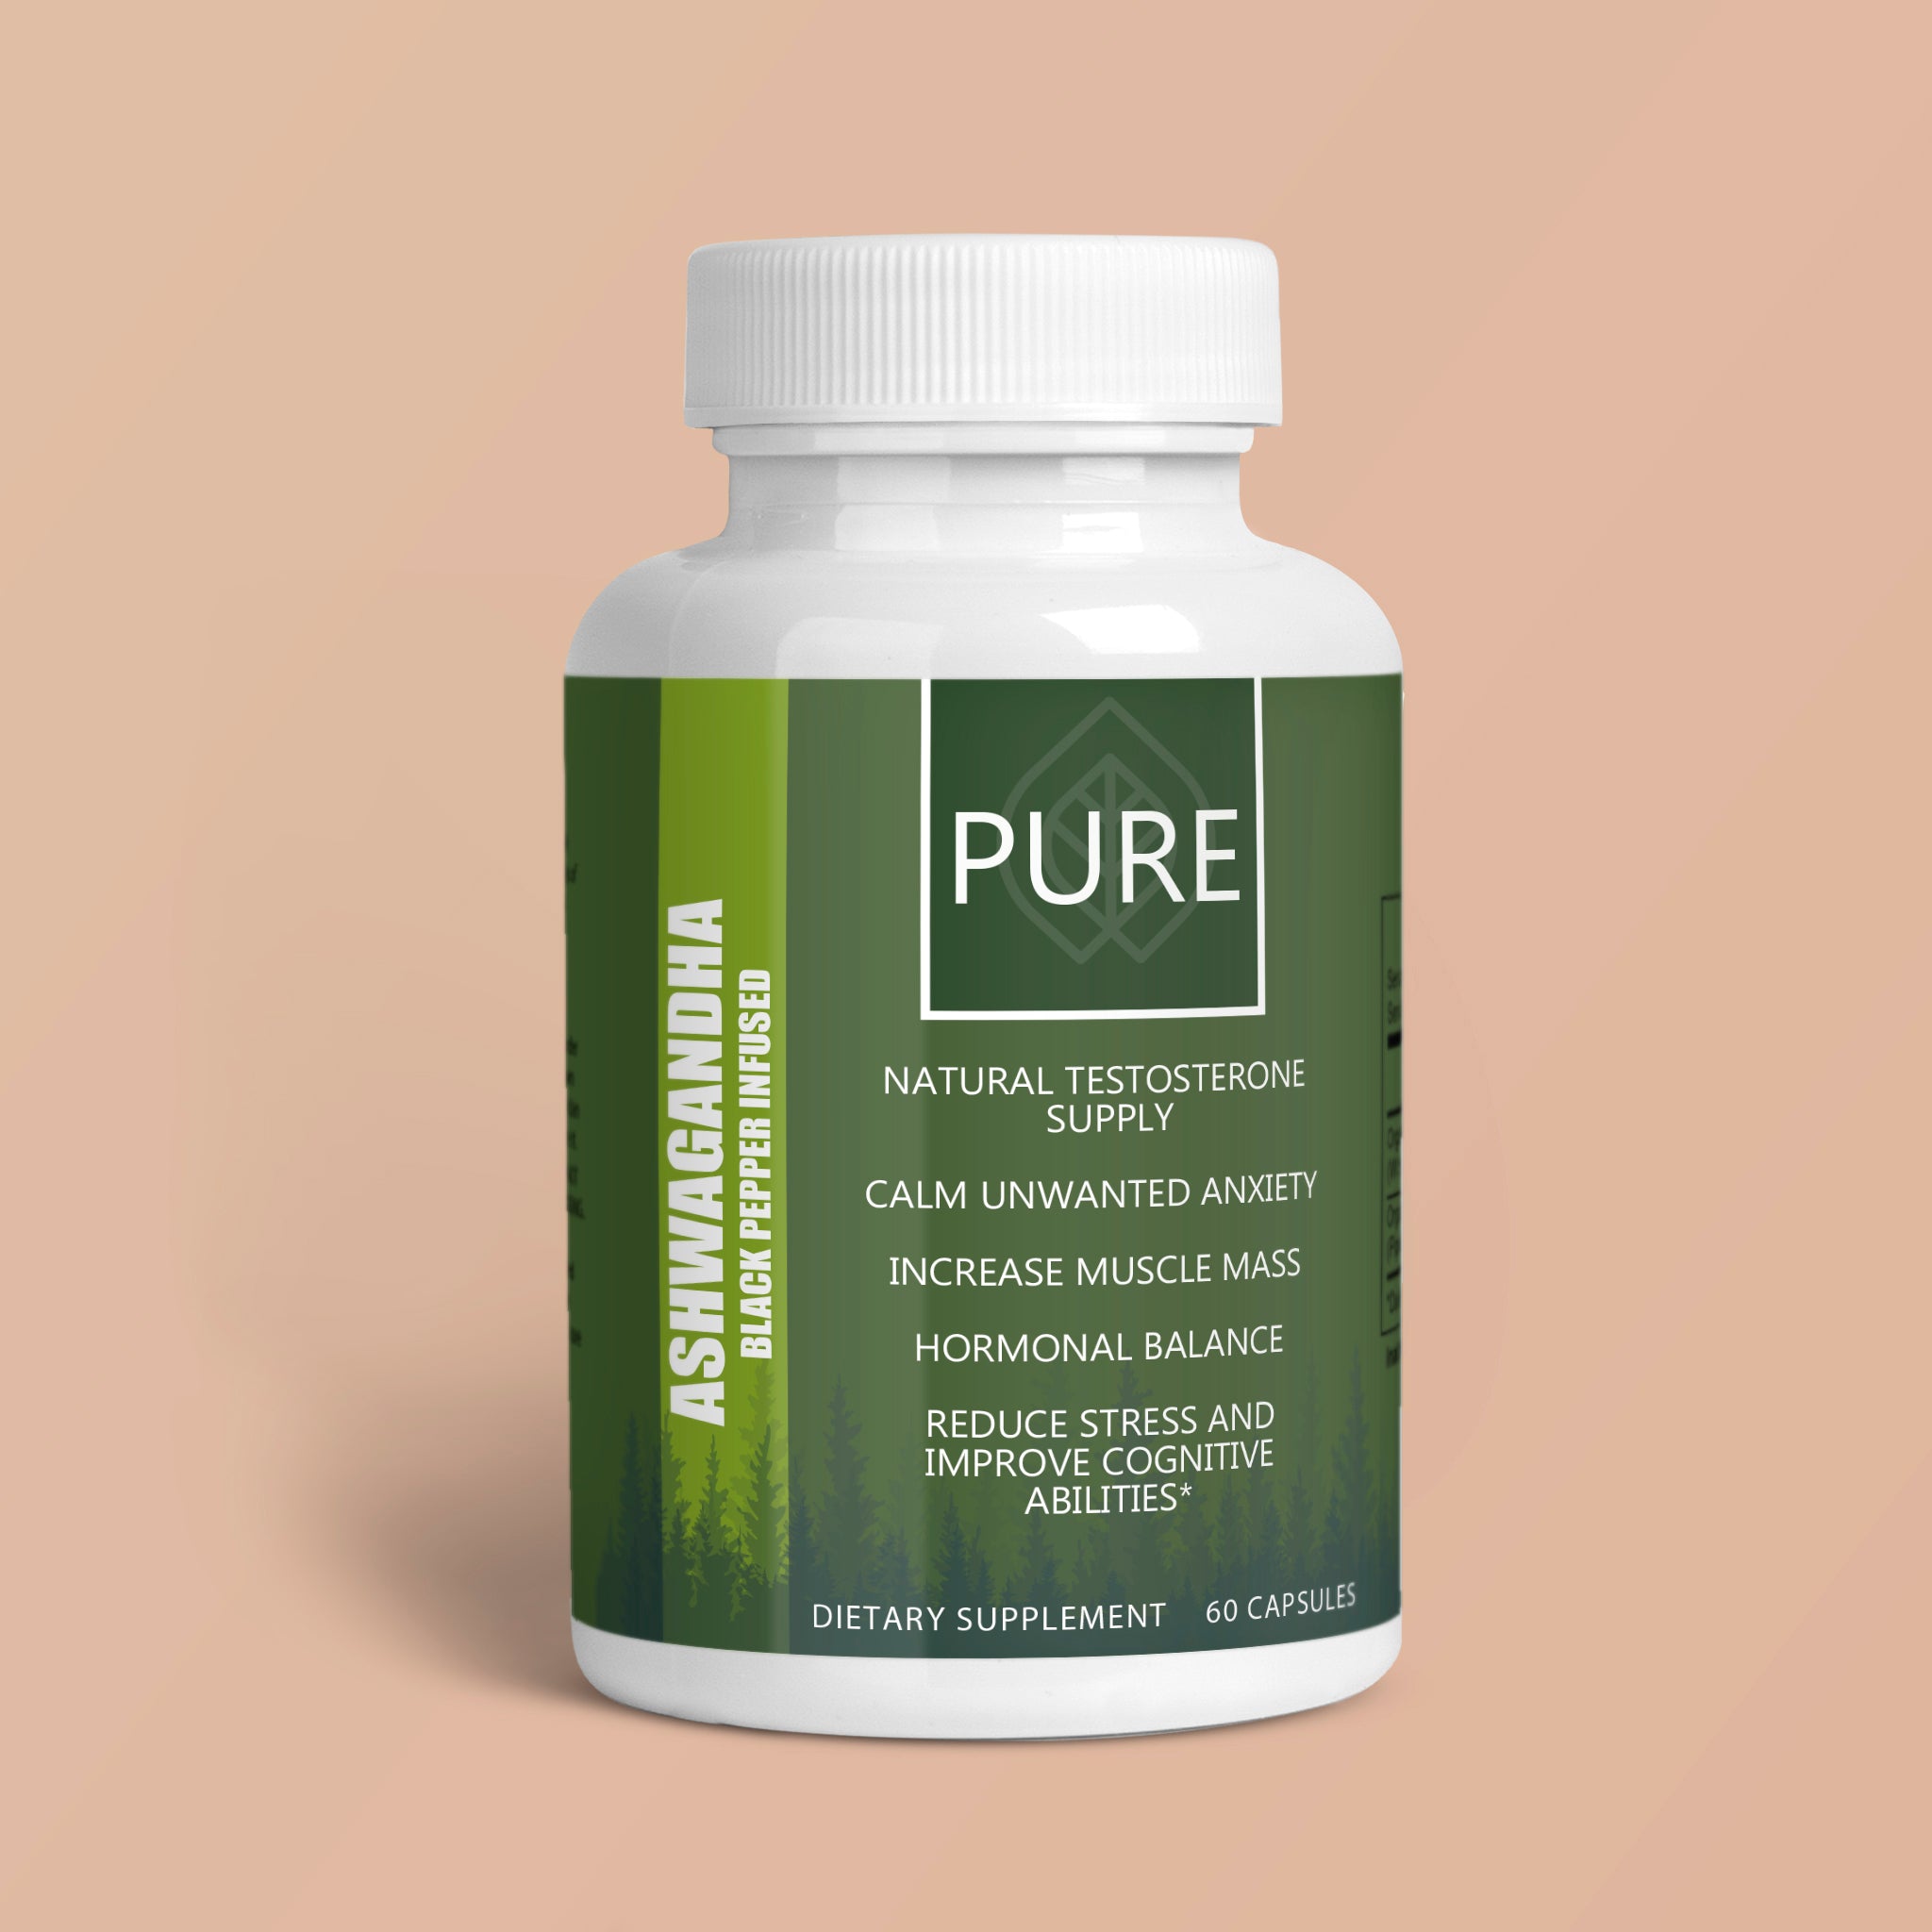 PURE. Ashwagandha Black Pepper Infusion PURE Supplement